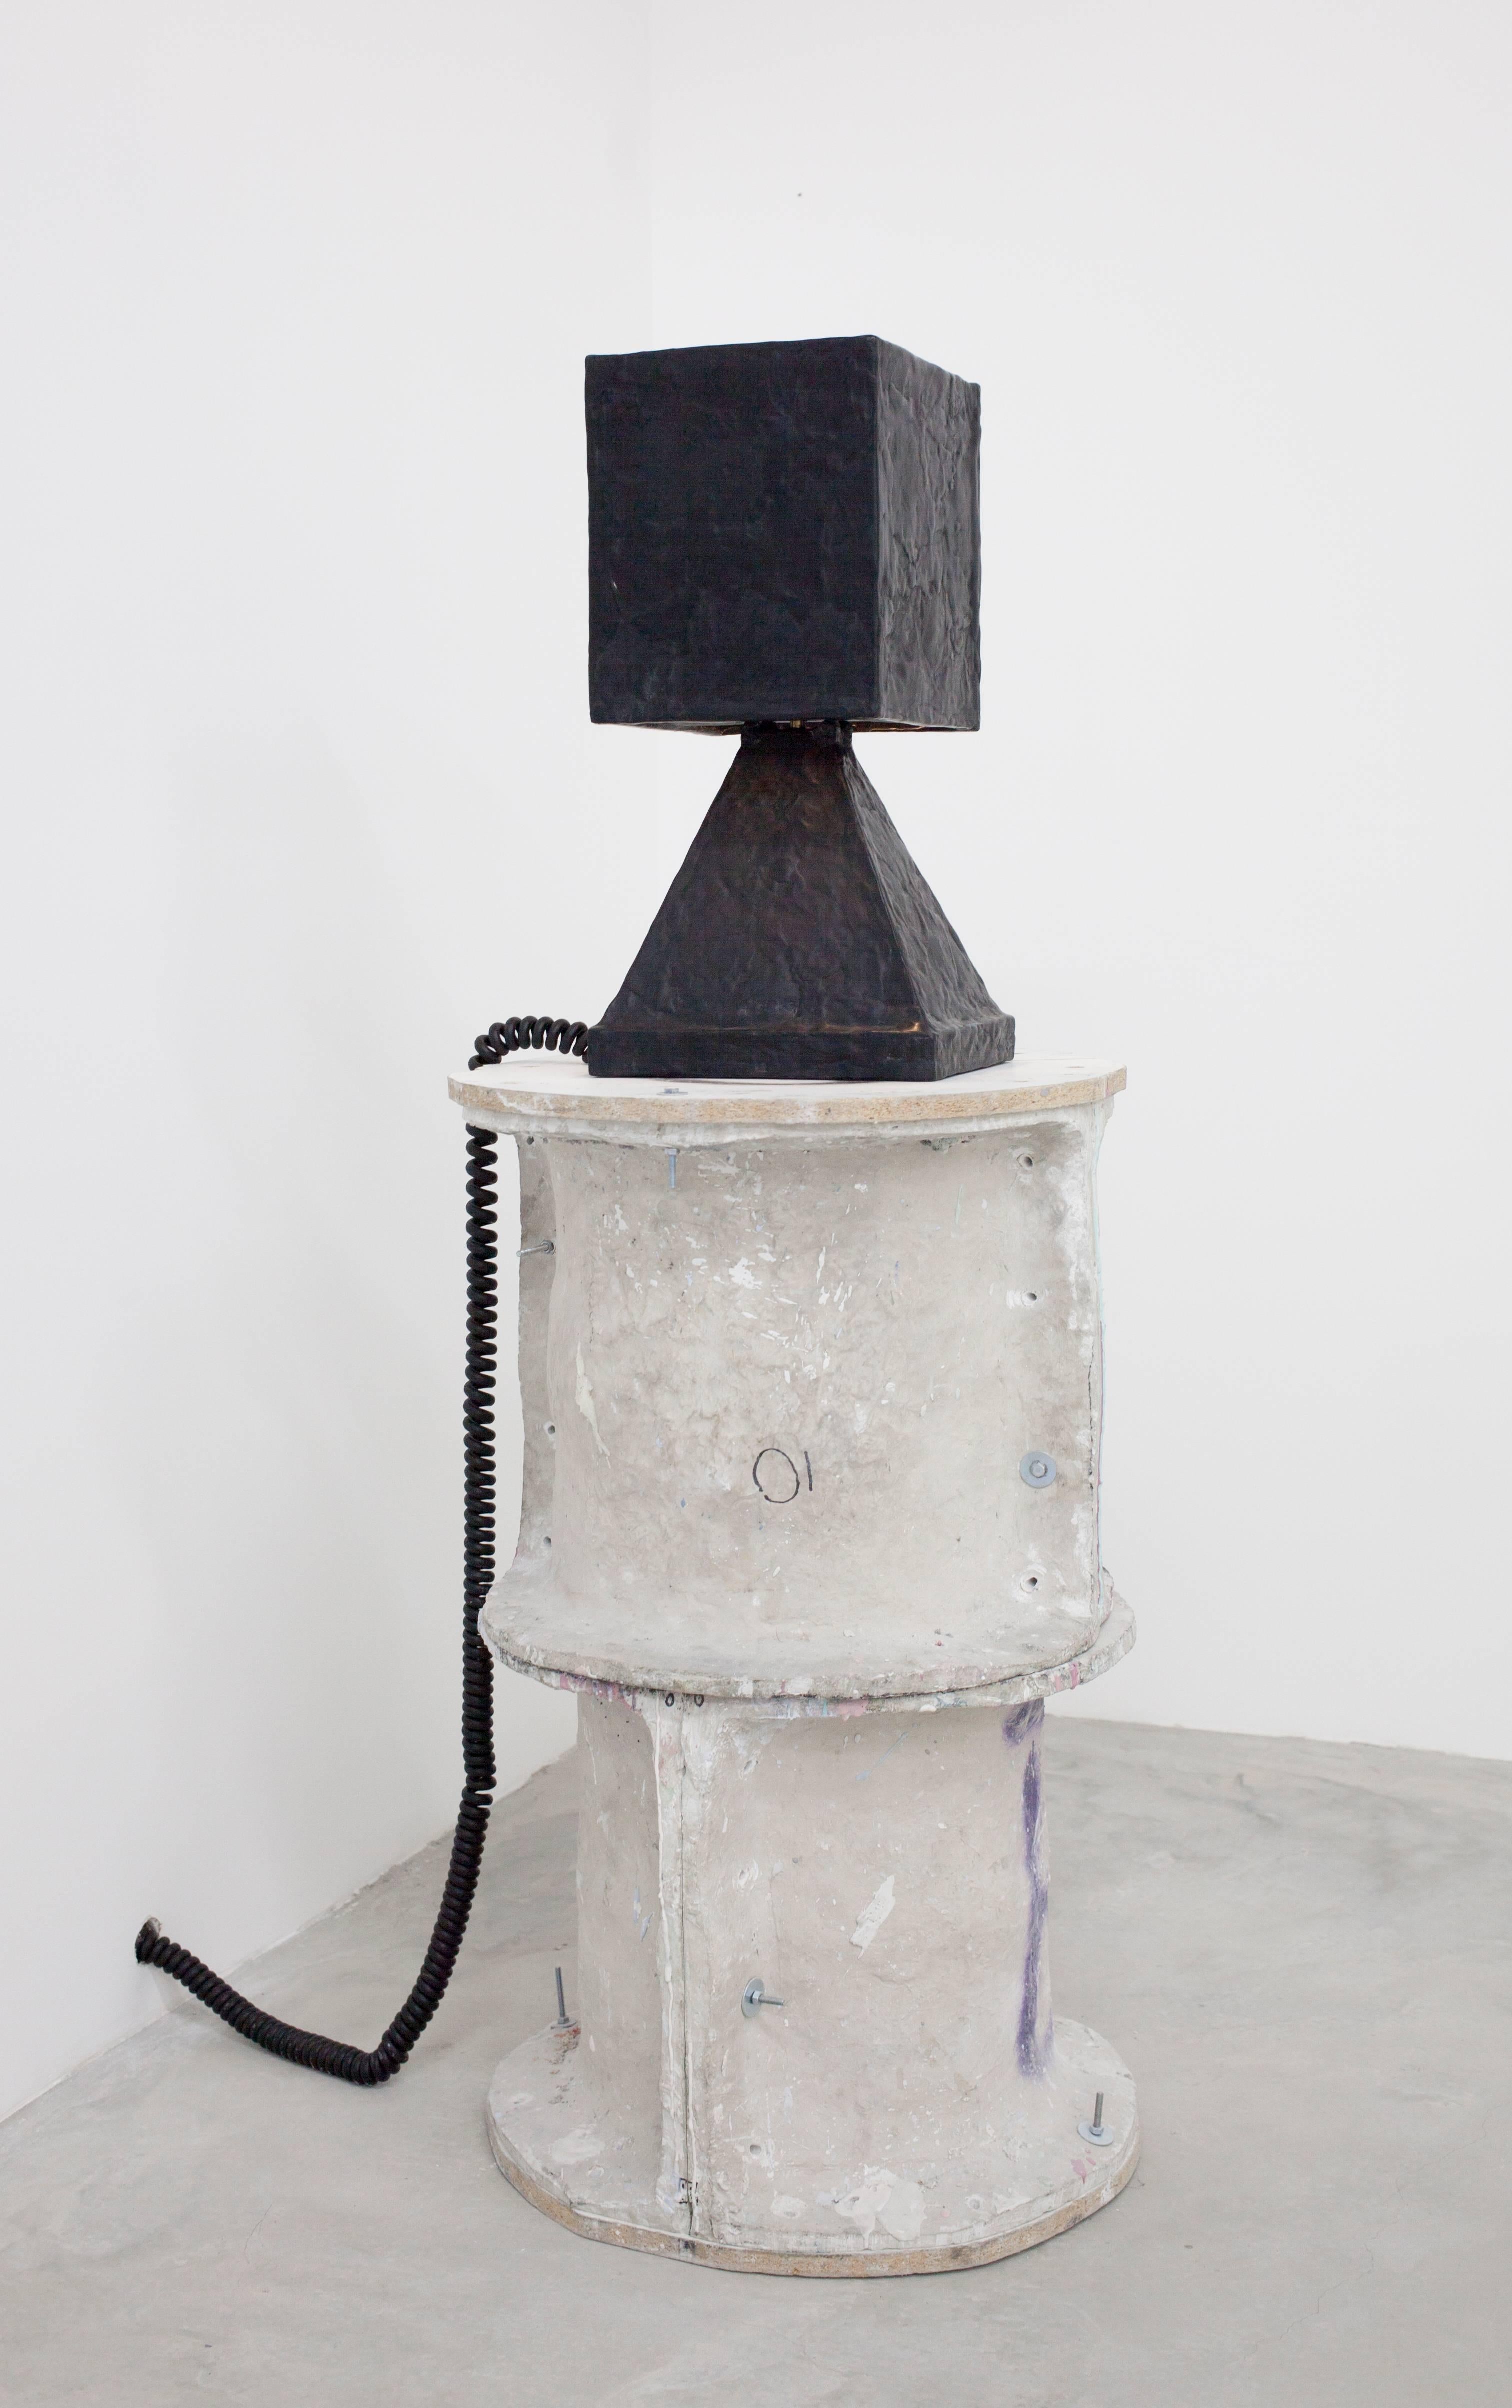 Grotesque Lamp, 2017
Shown in black epoxy
Available in white epoxy
Measures 29